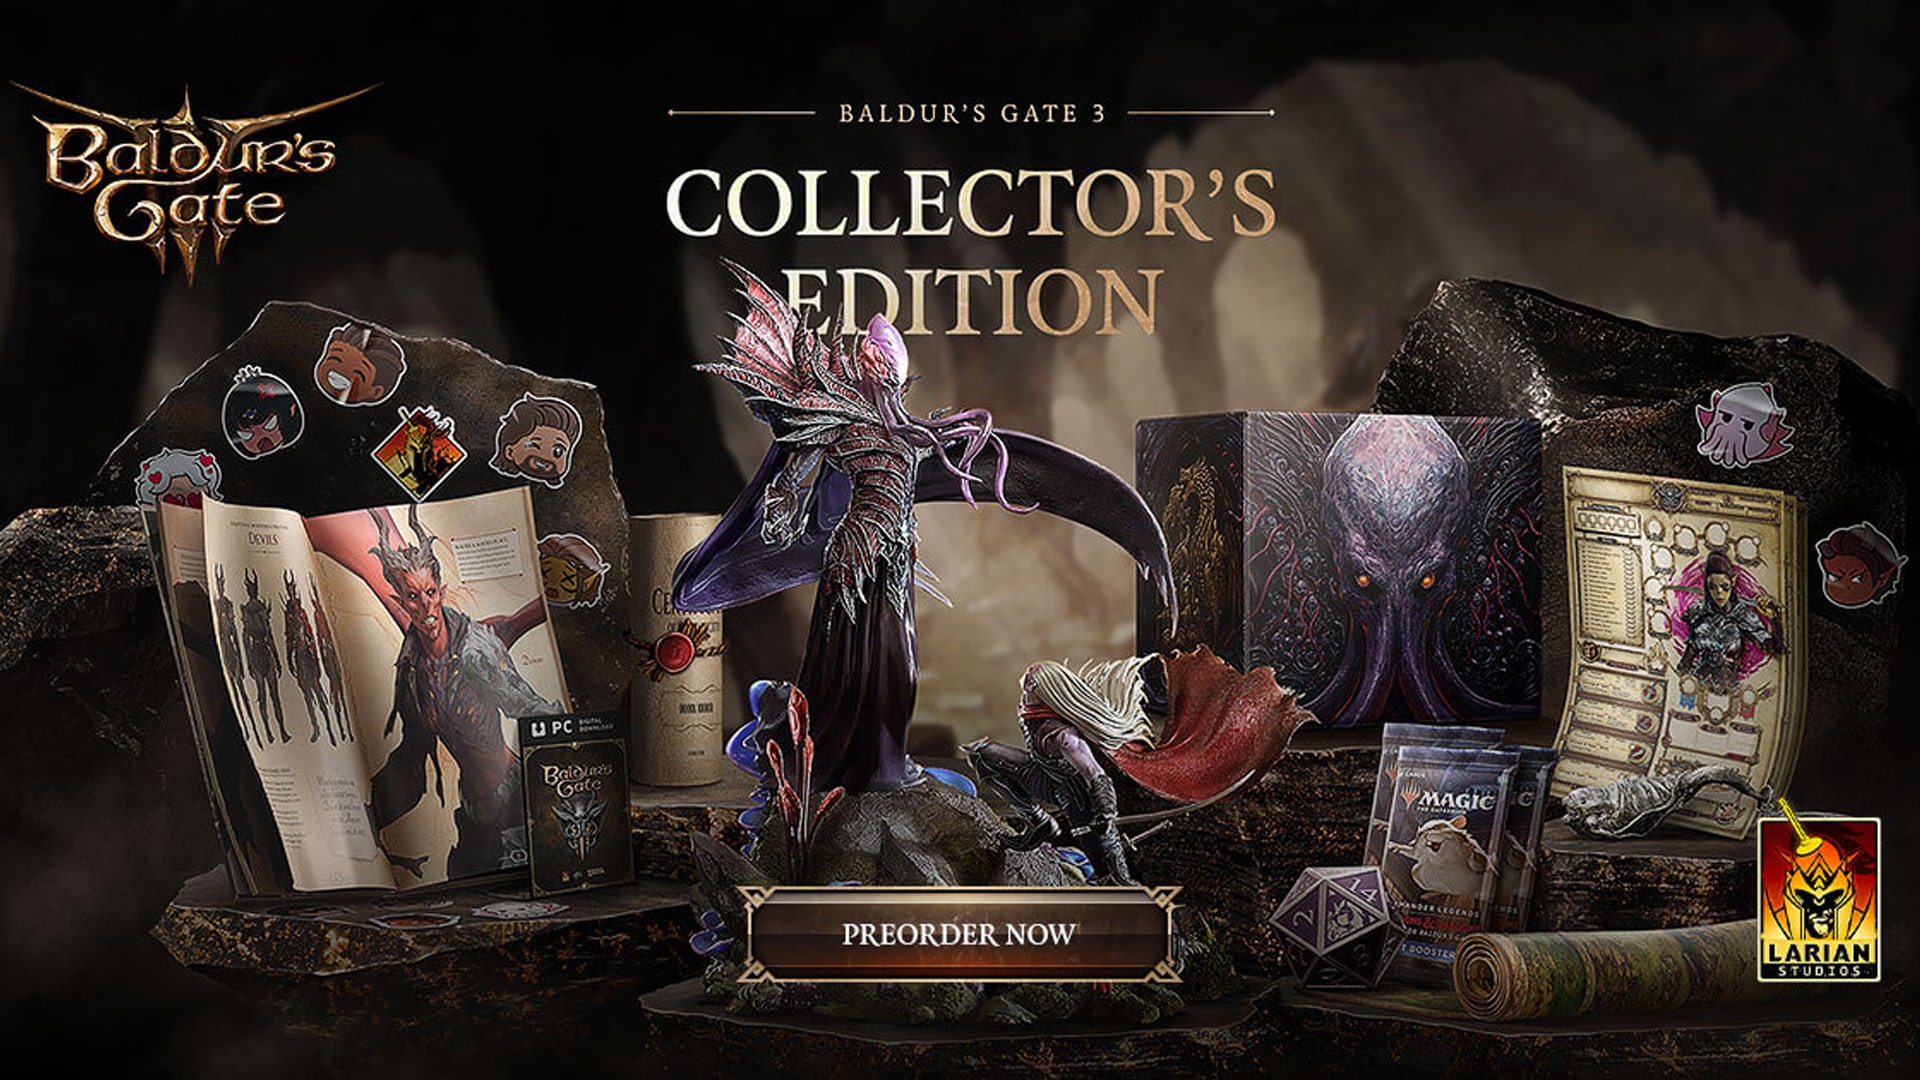 Assortment of Baldur's Gate 3 exclusive collector's items, highlighting rare and special edition treasures for fans